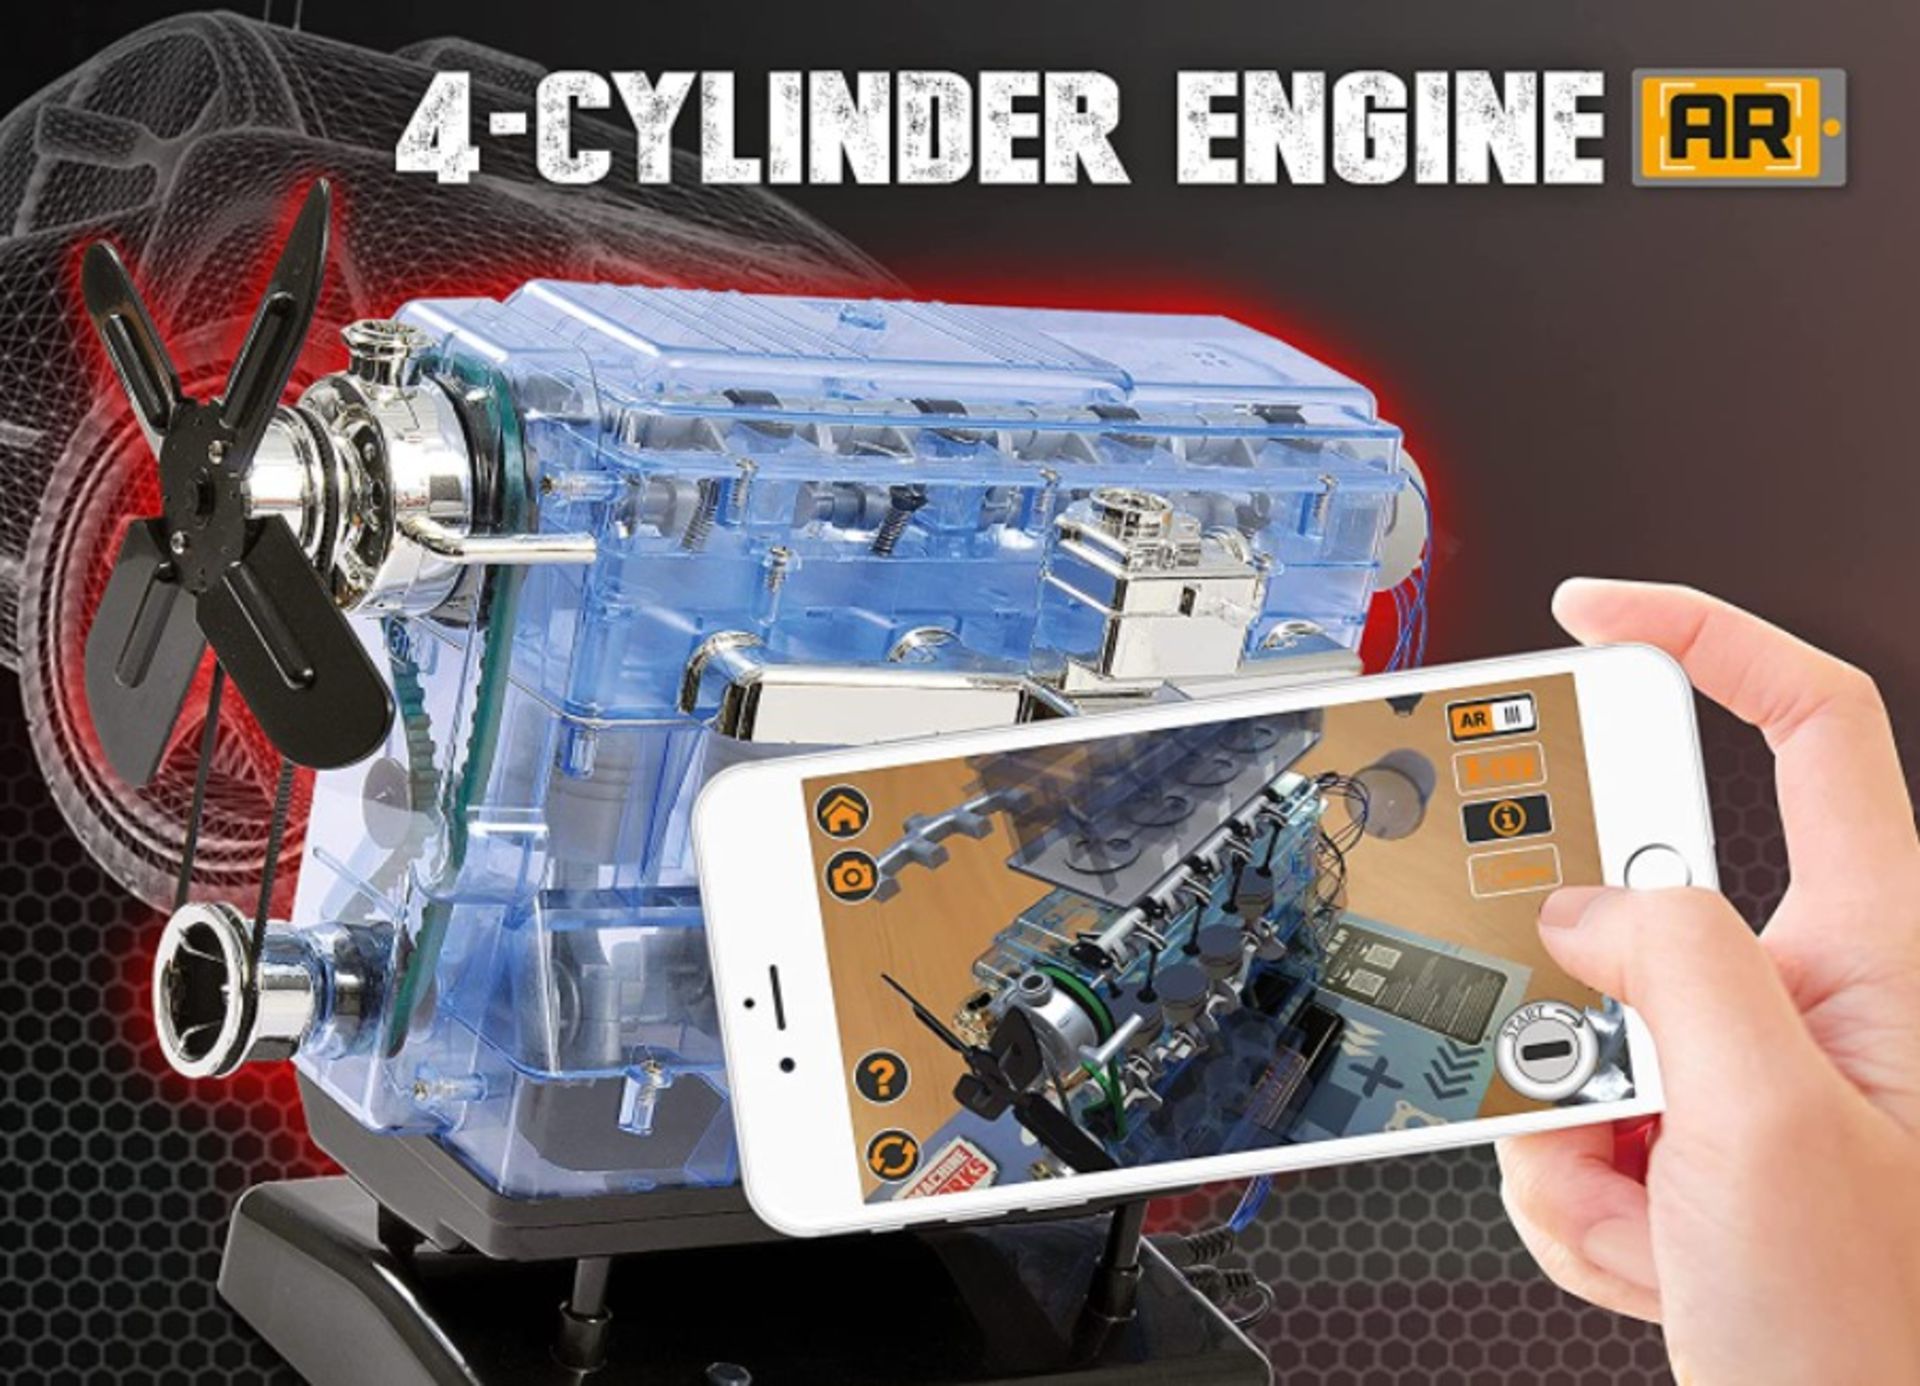 (8B) Lot RRP £80. 2x Machine Works Items. 1x 4 Cylinder Engine AR With Digital & Interactive Augmen - Image 2 of 10